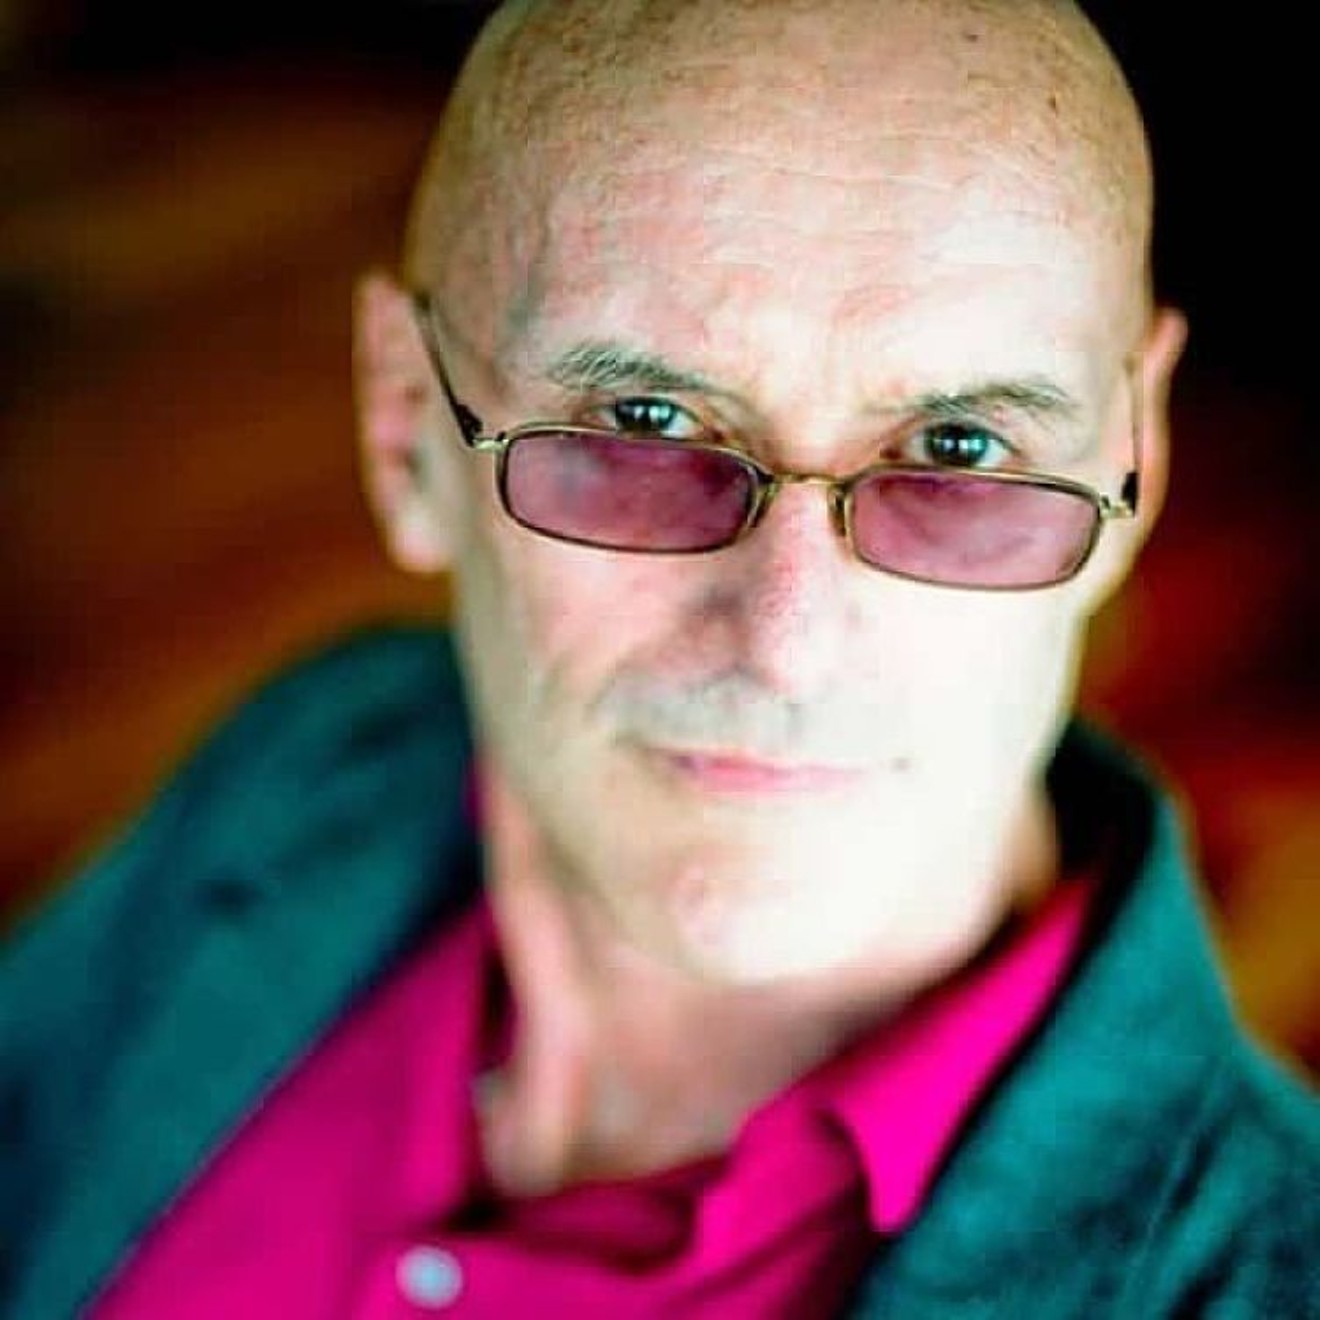 Ken Wilber is the smartest Coloradan most people have never heard about.